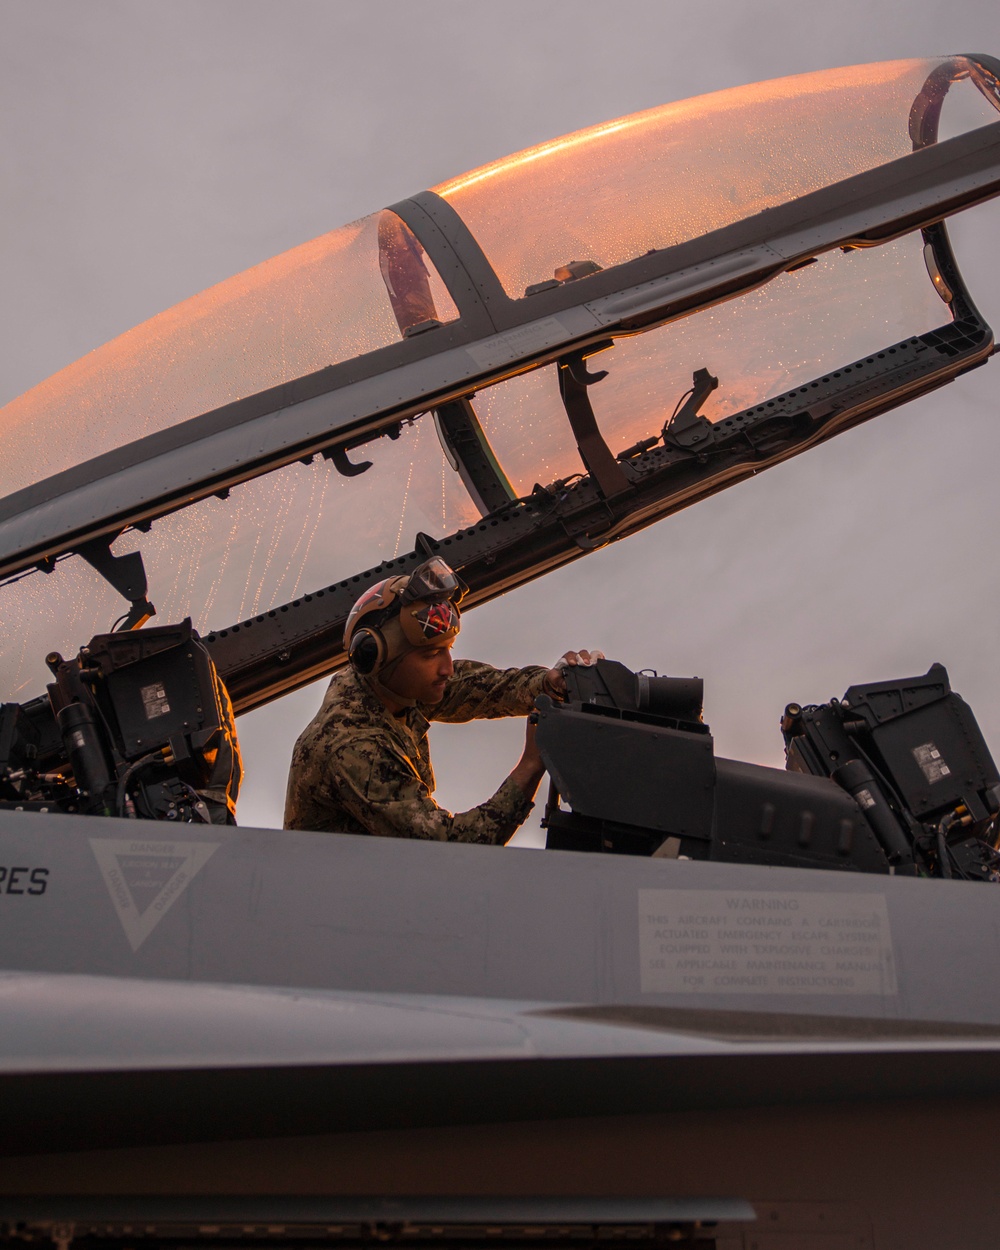 Airman conducts inspection on EA-18G